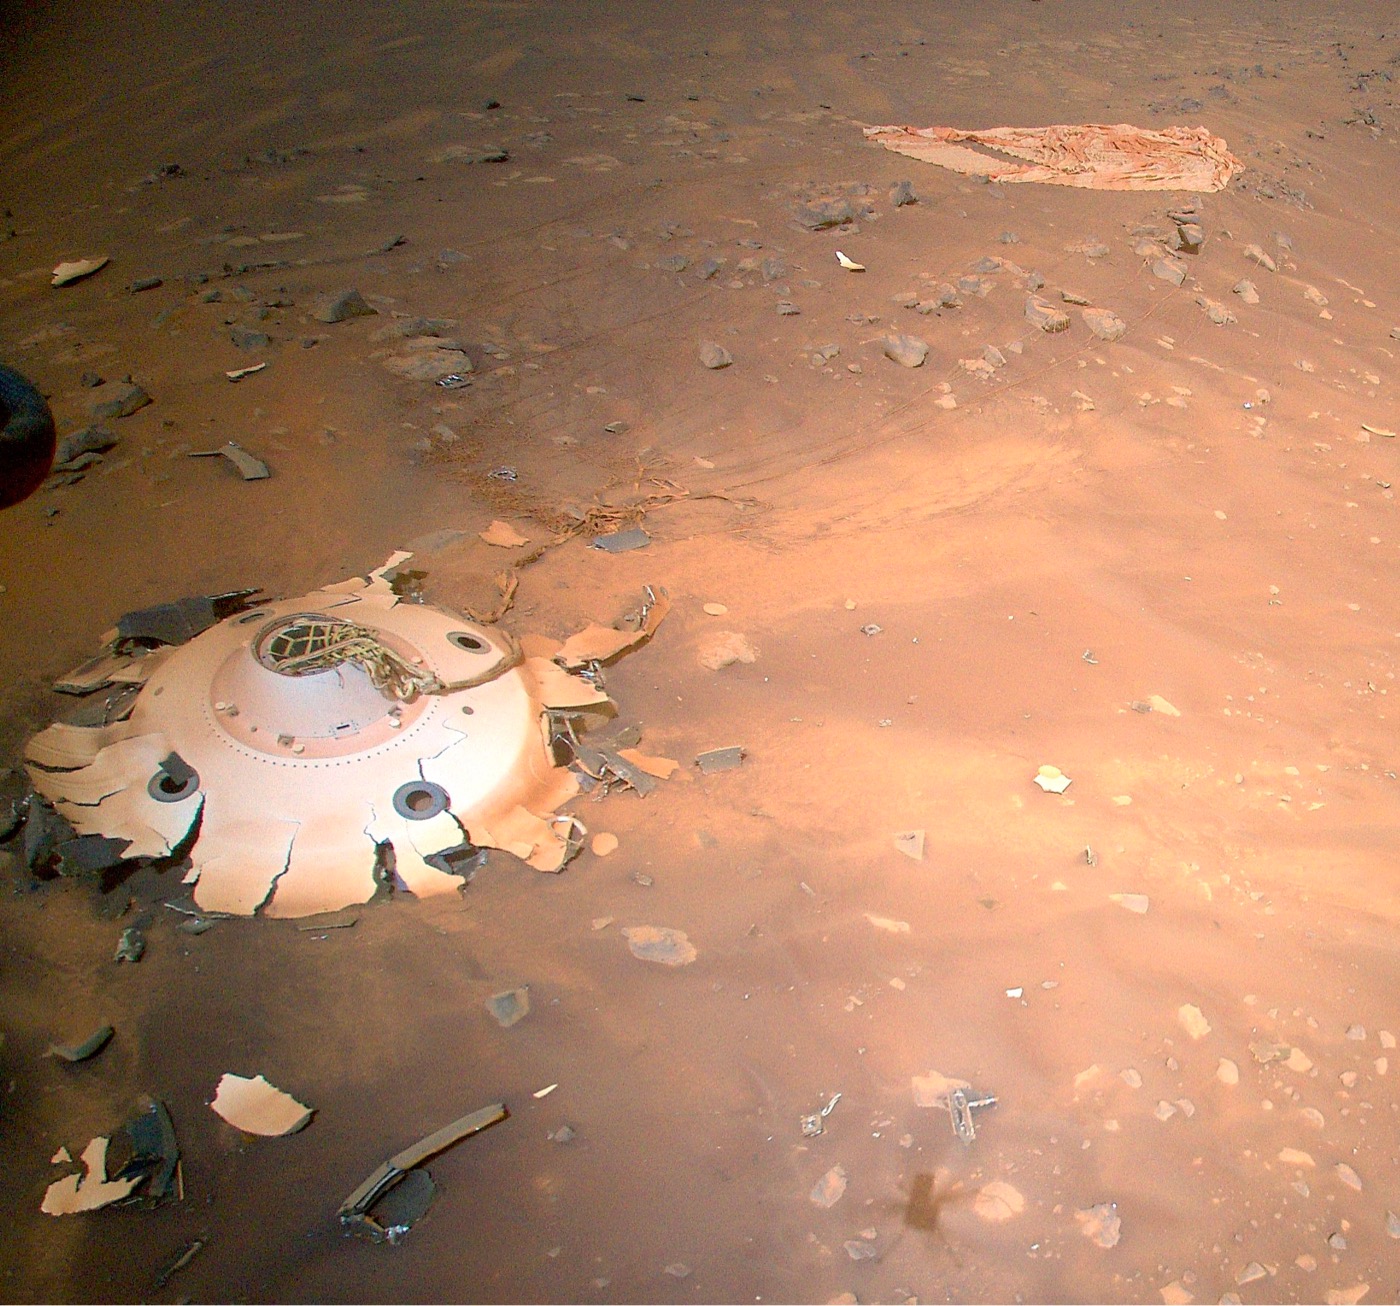 wreckage from the landing of NASA's Perseverance rover on Mars